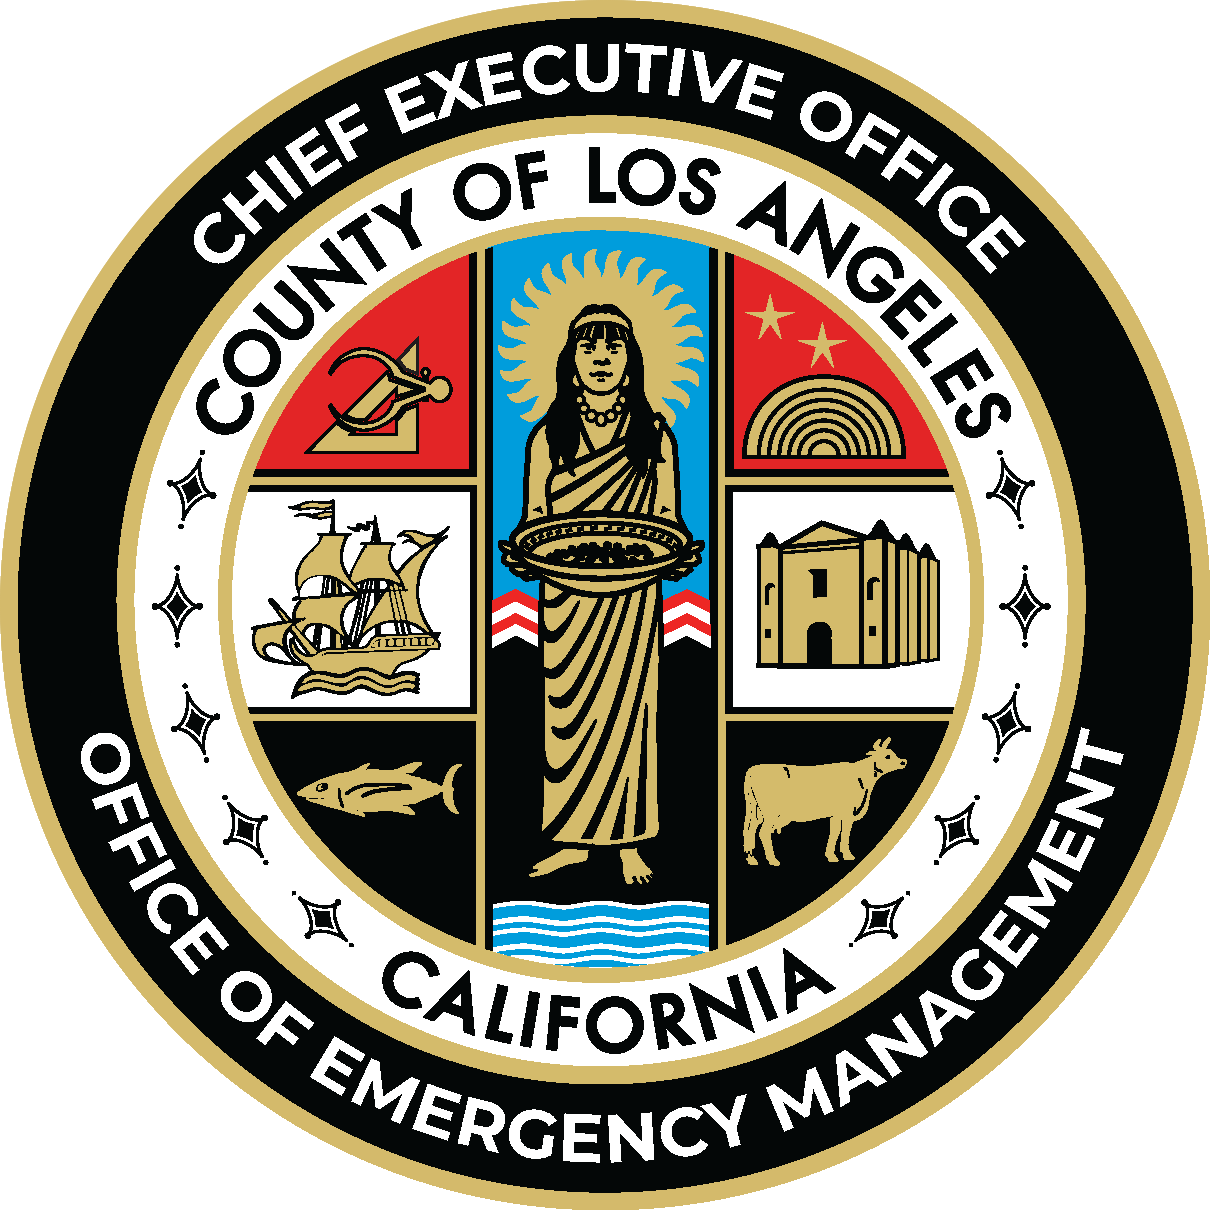 Emergency – COUNTY OF LOS ANGELES